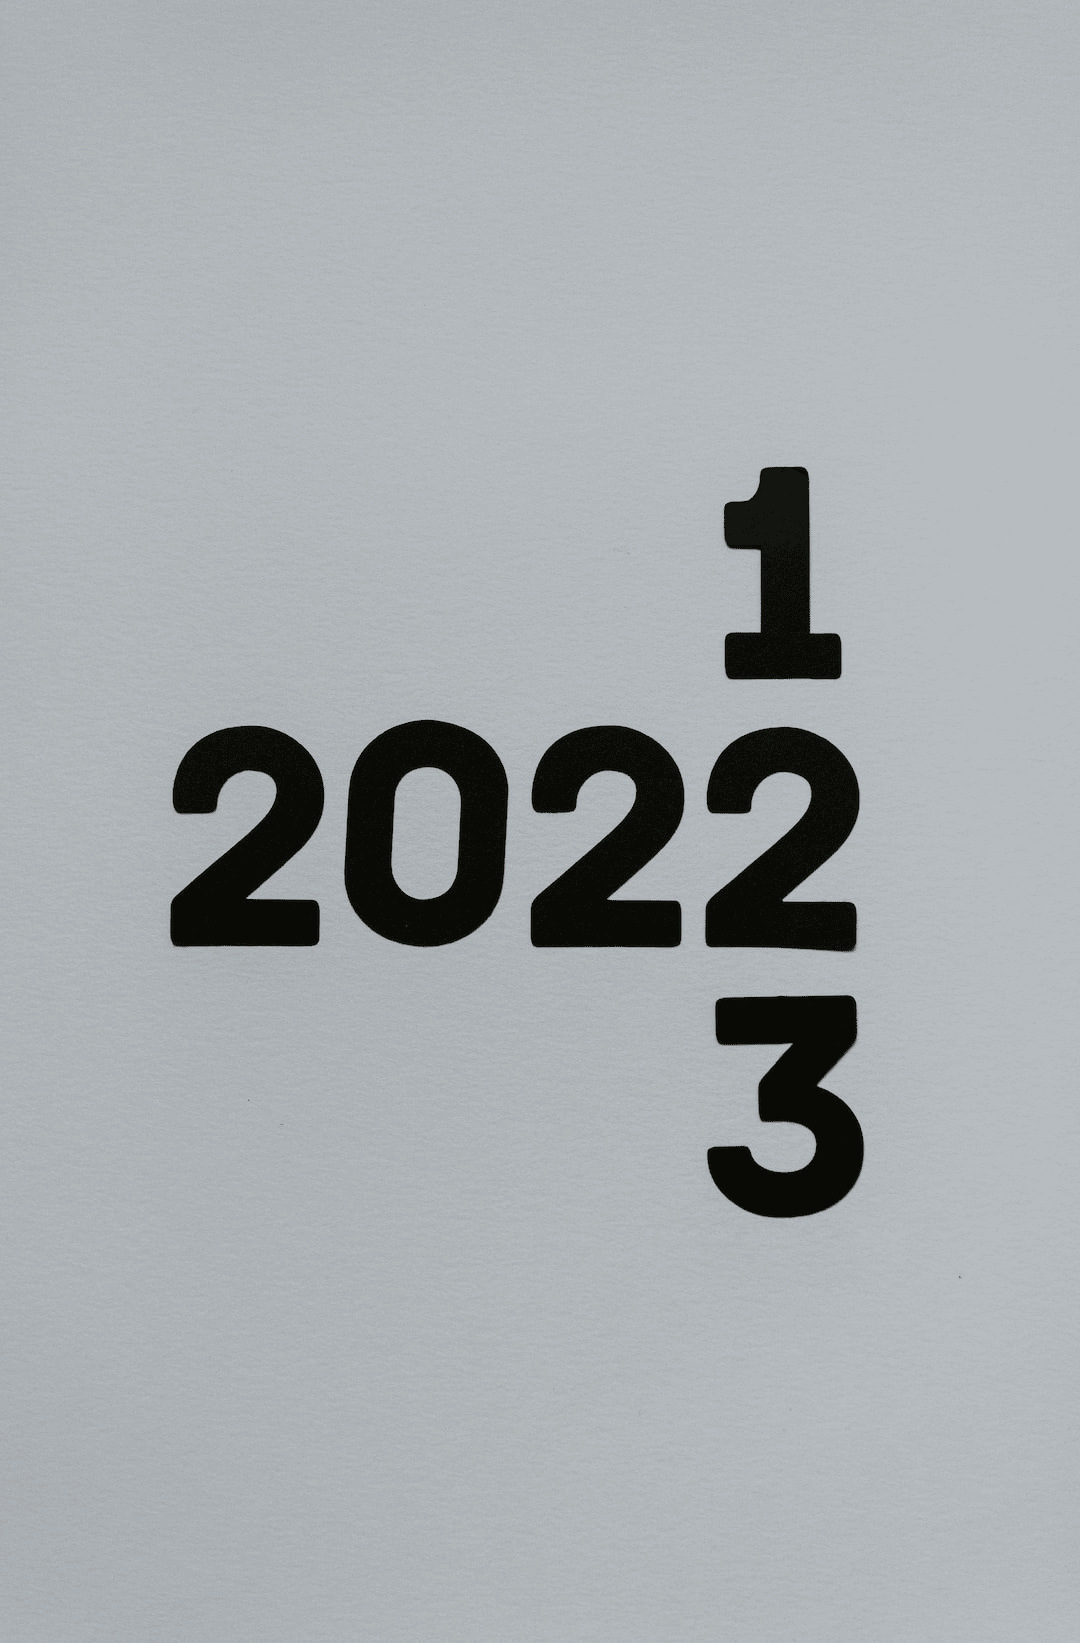 The Craft Story Continues — The Year 2022 in Review And Looking Ahead